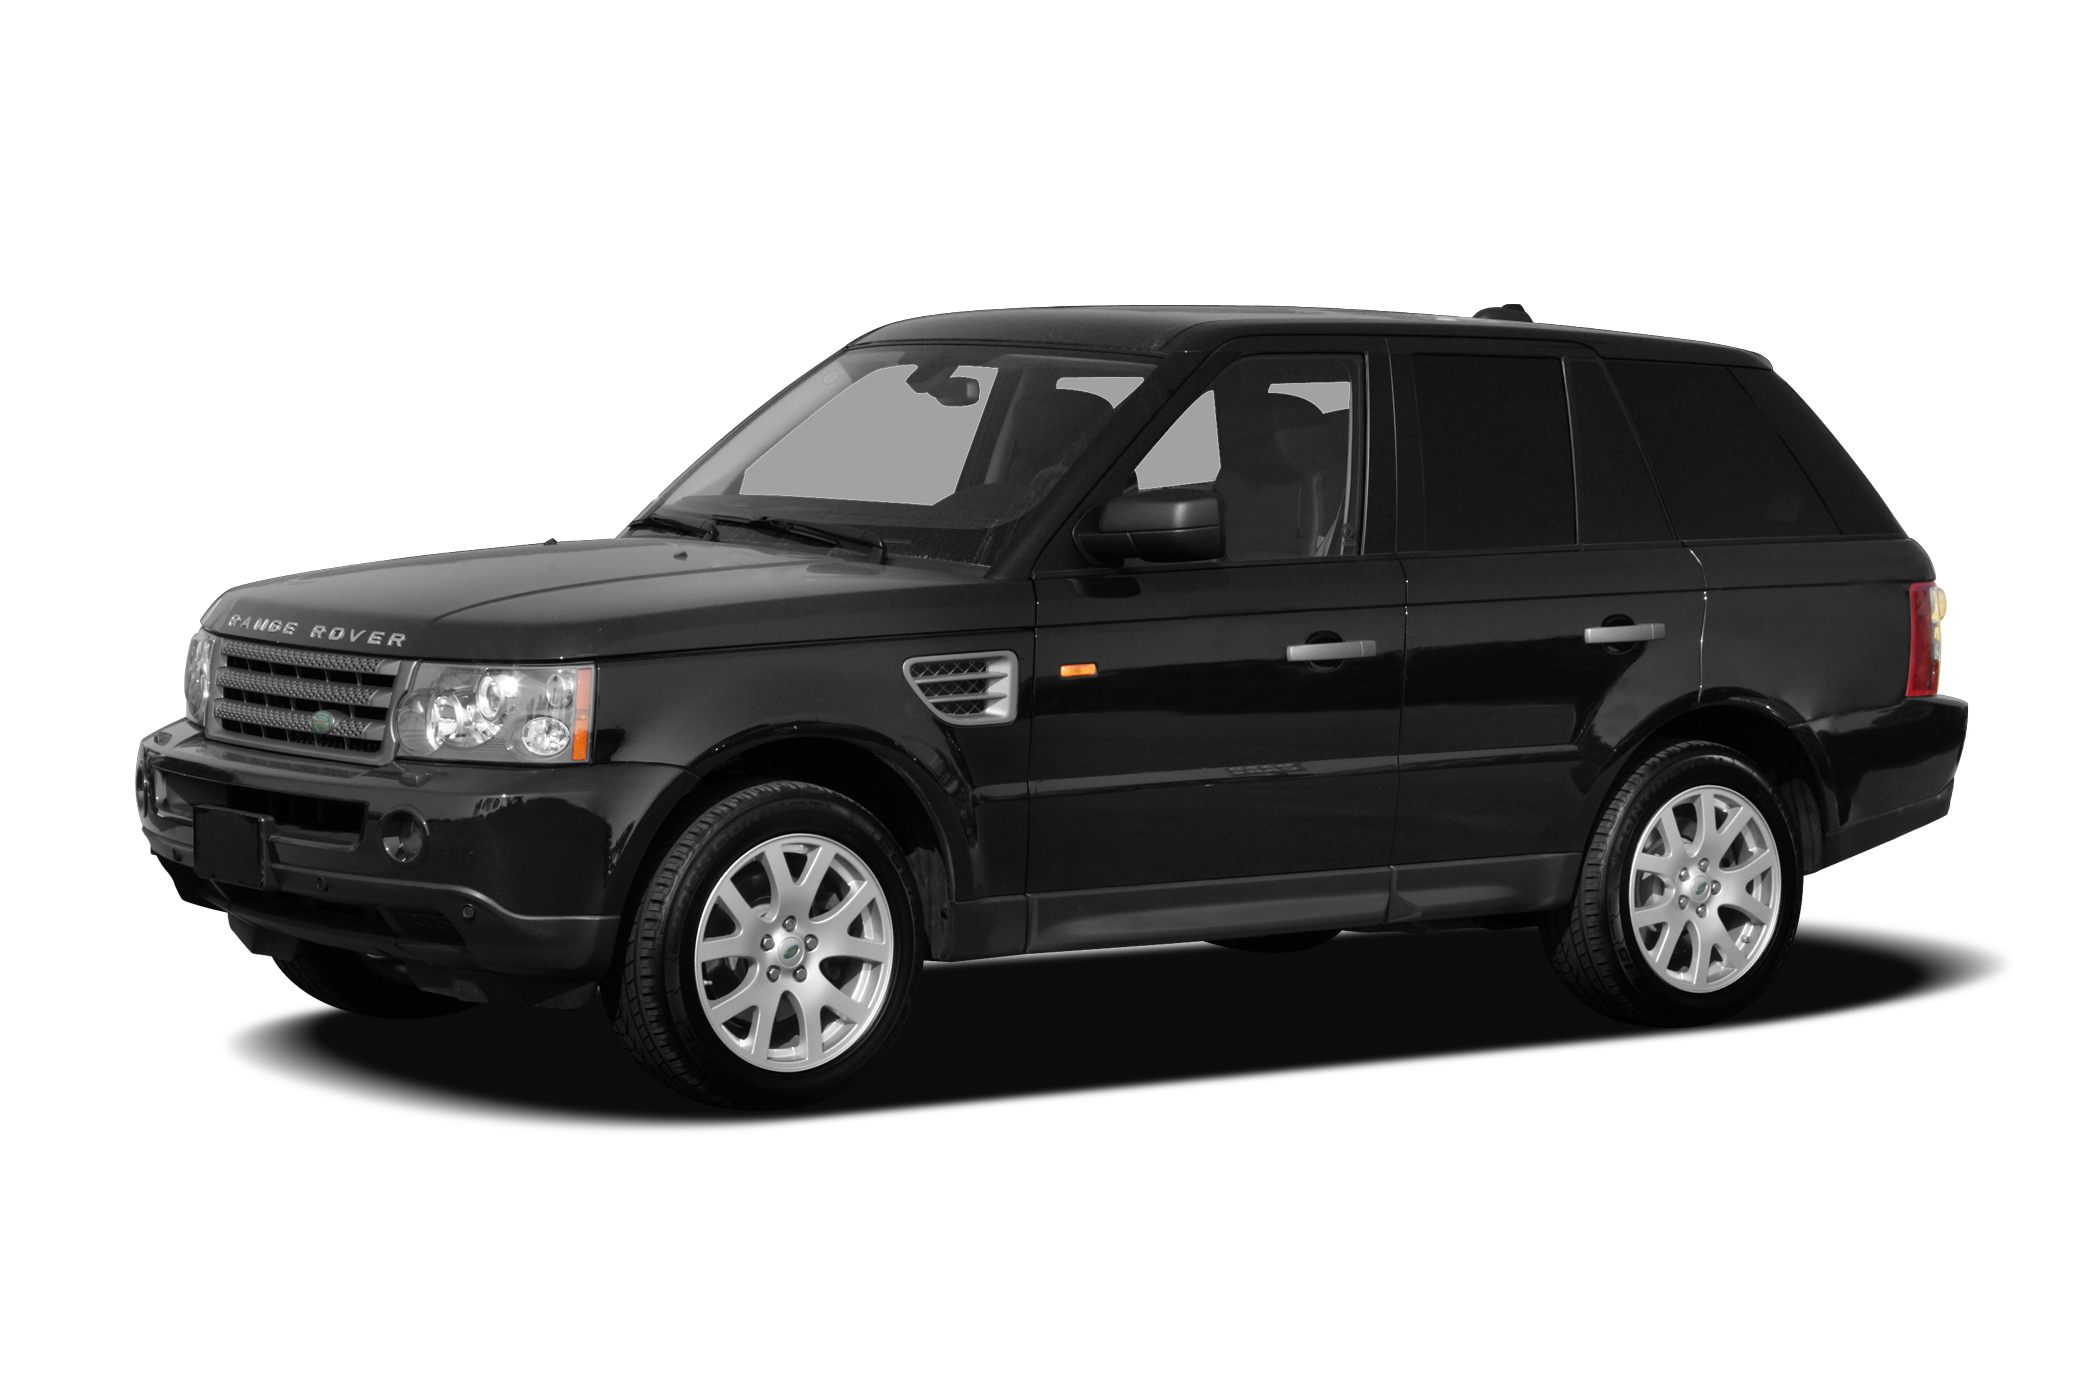 2007 Land Rover Range Rover Hse 4dr All Wheel Drive Specs And Prices